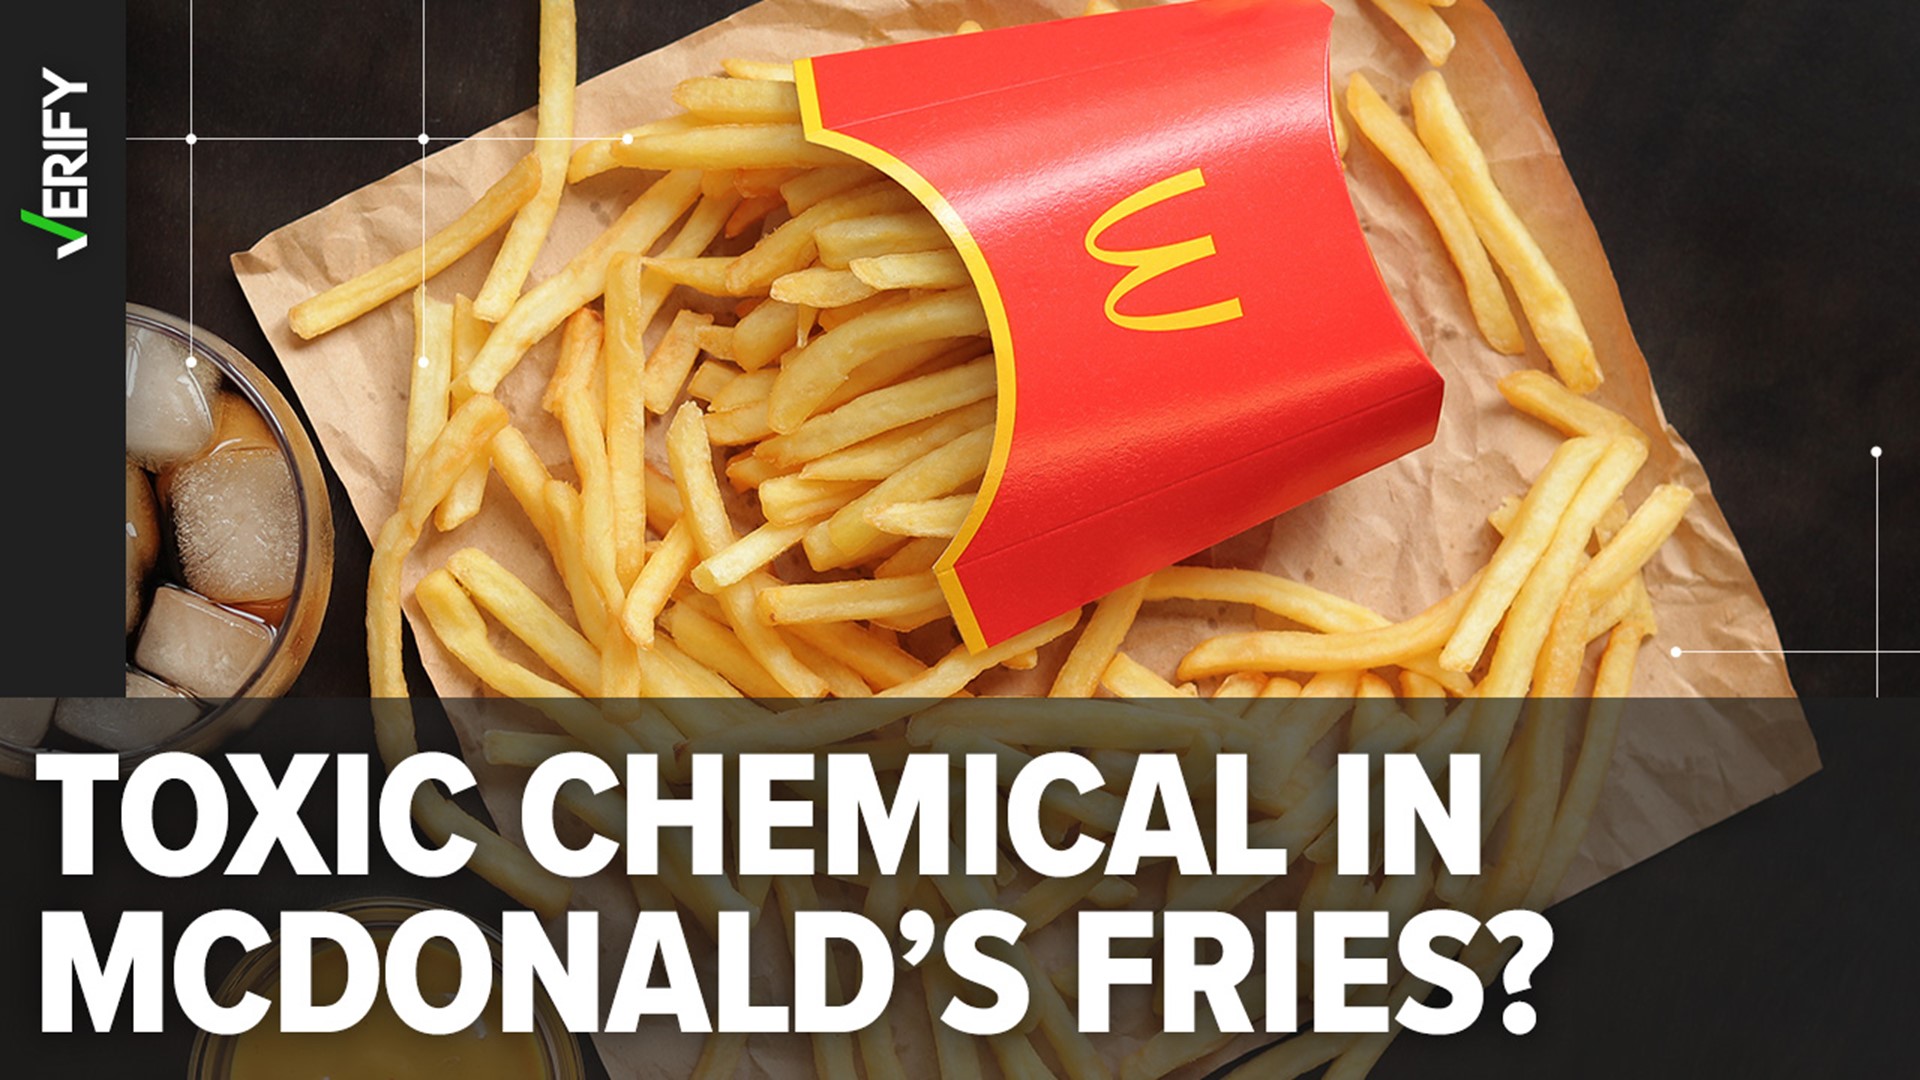 Many foods that are fried, roasted or baked at high temperatures likely contain acrylamide, which is also found in cigarette smoke.